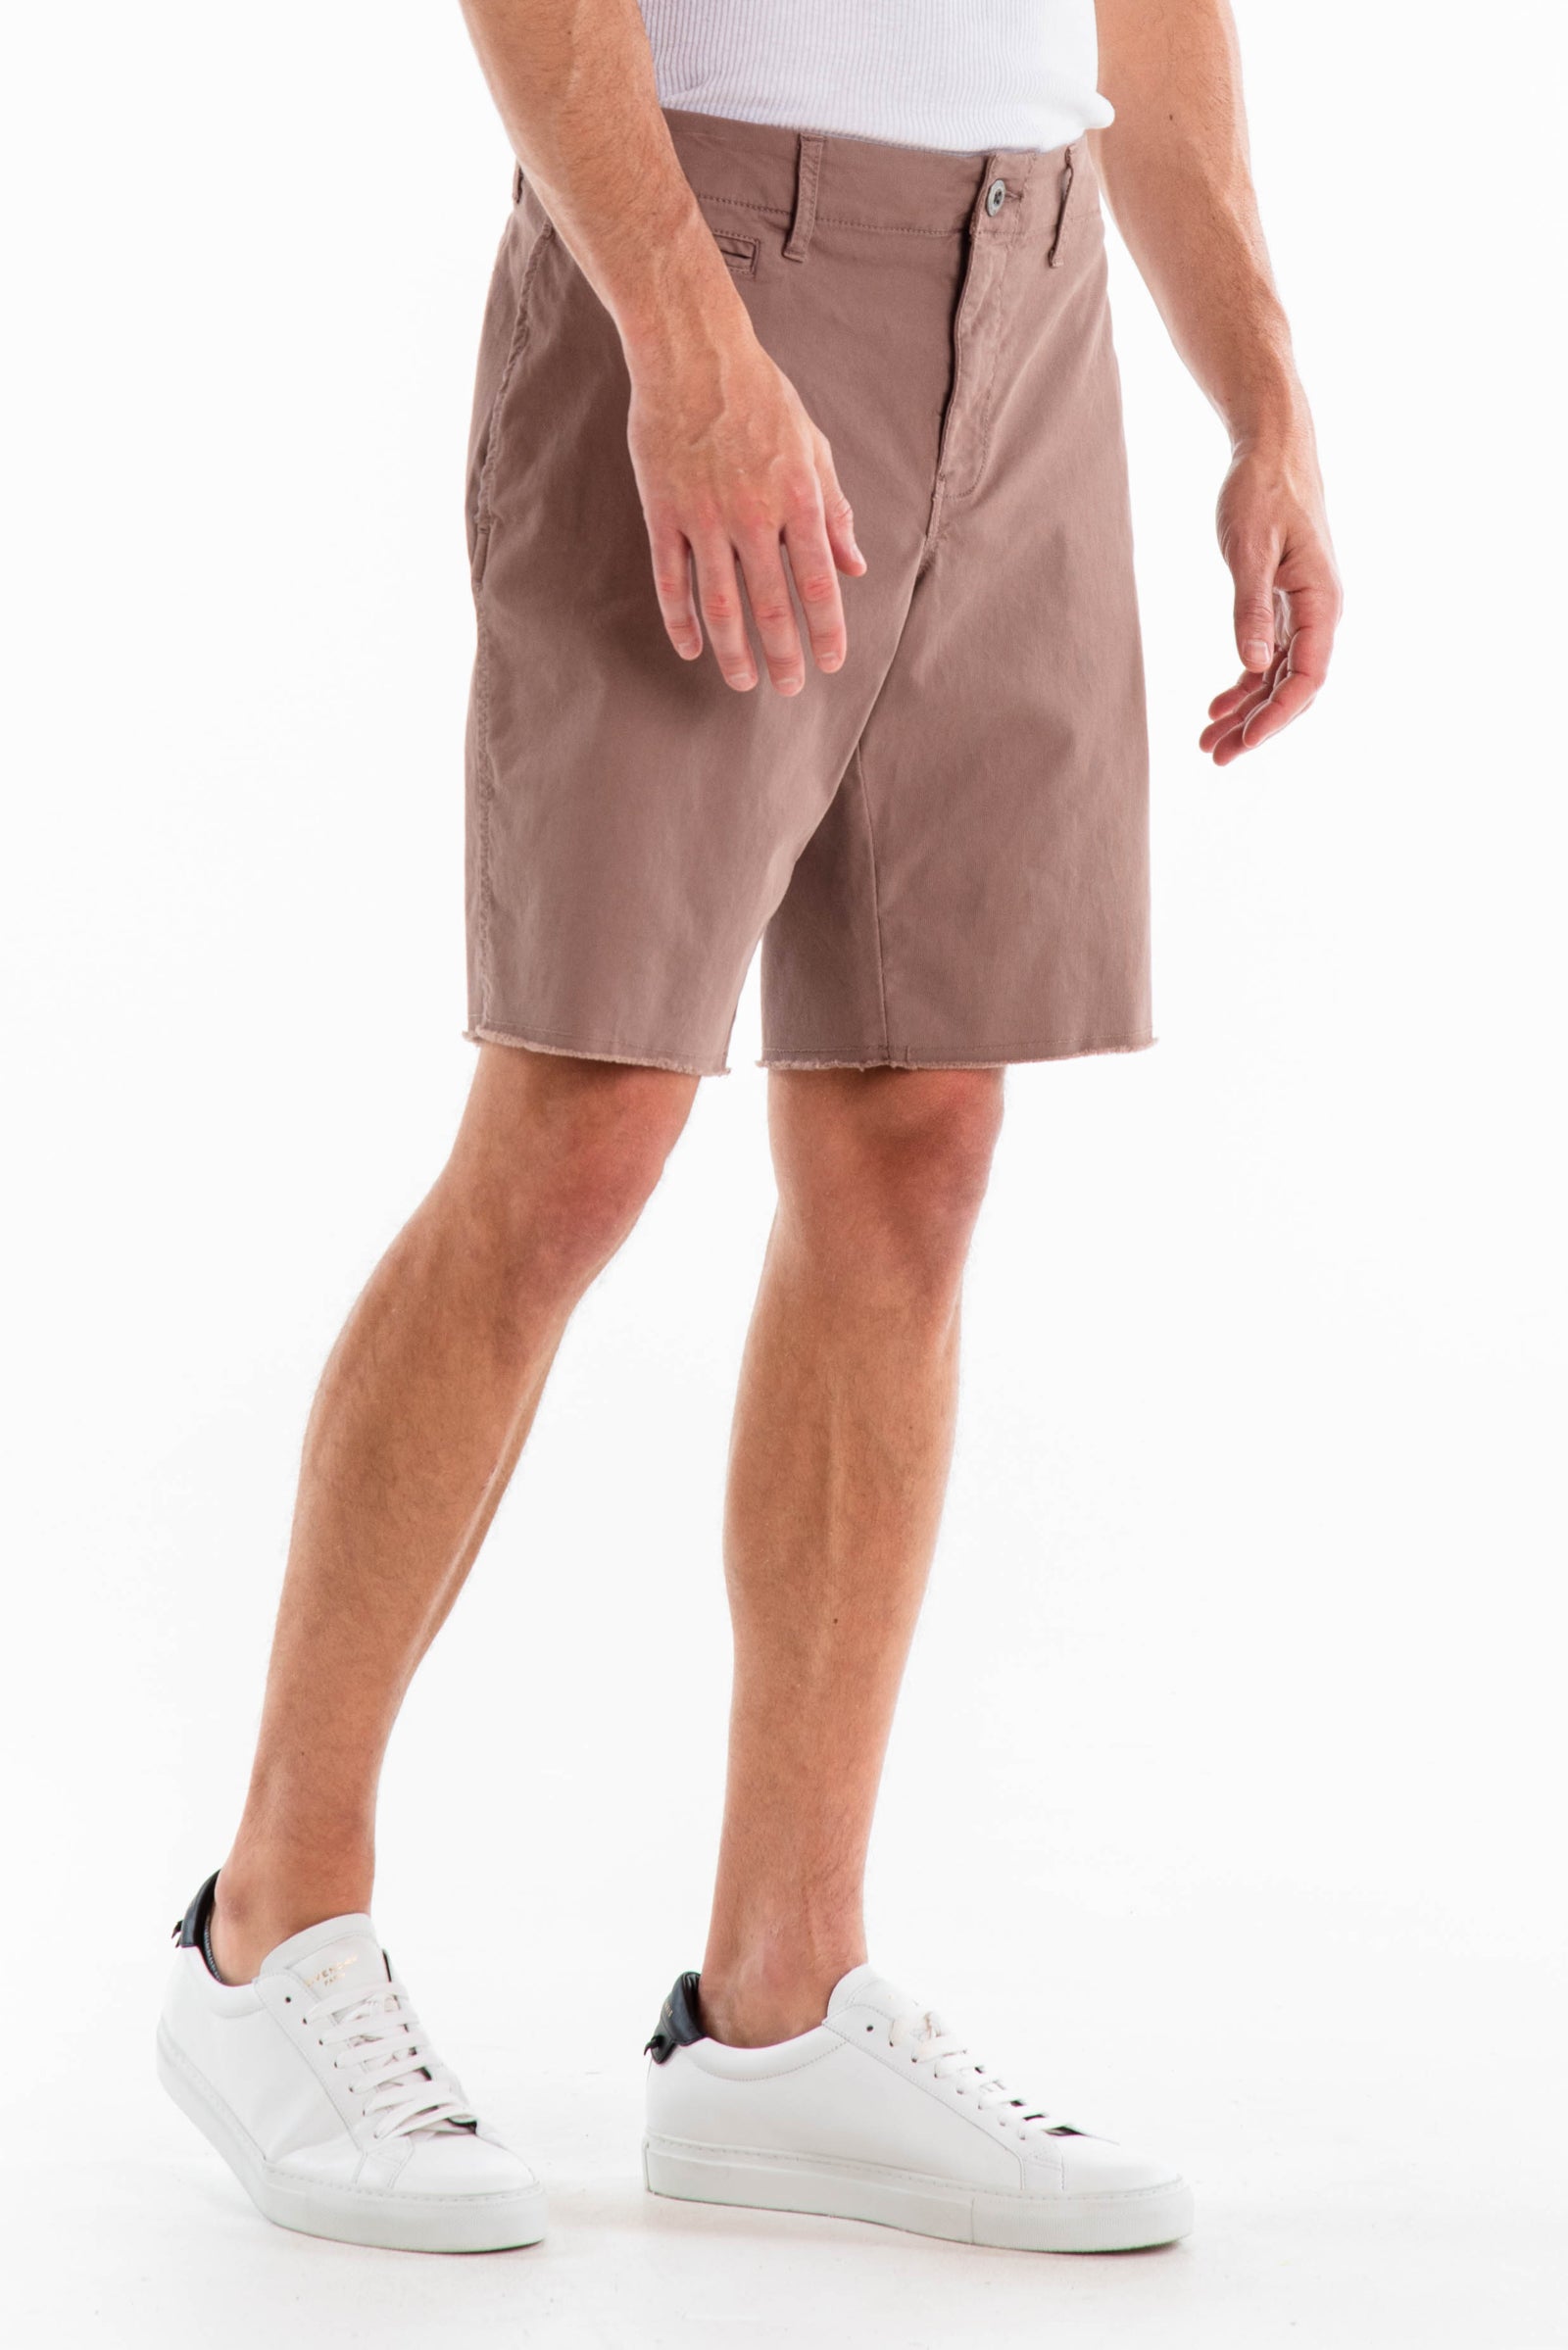 Original Paperbacks Rockland Chino Short in Chocolate on Model Cropped Side View